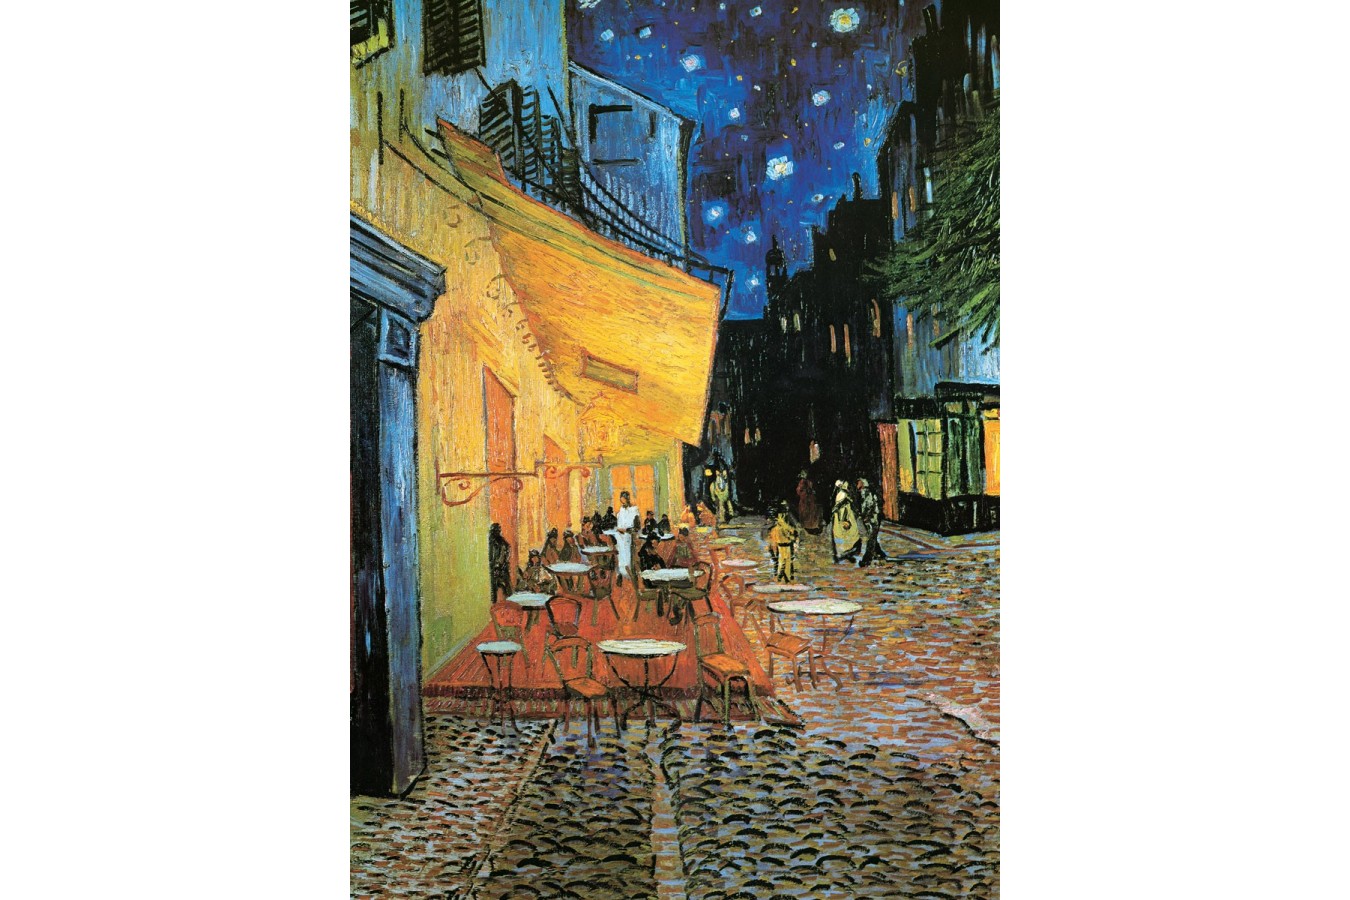 Puzzle Eurographics - Vincent Van Gogh: Cafe Terrace at Night, 1000 piese (6000-2143)